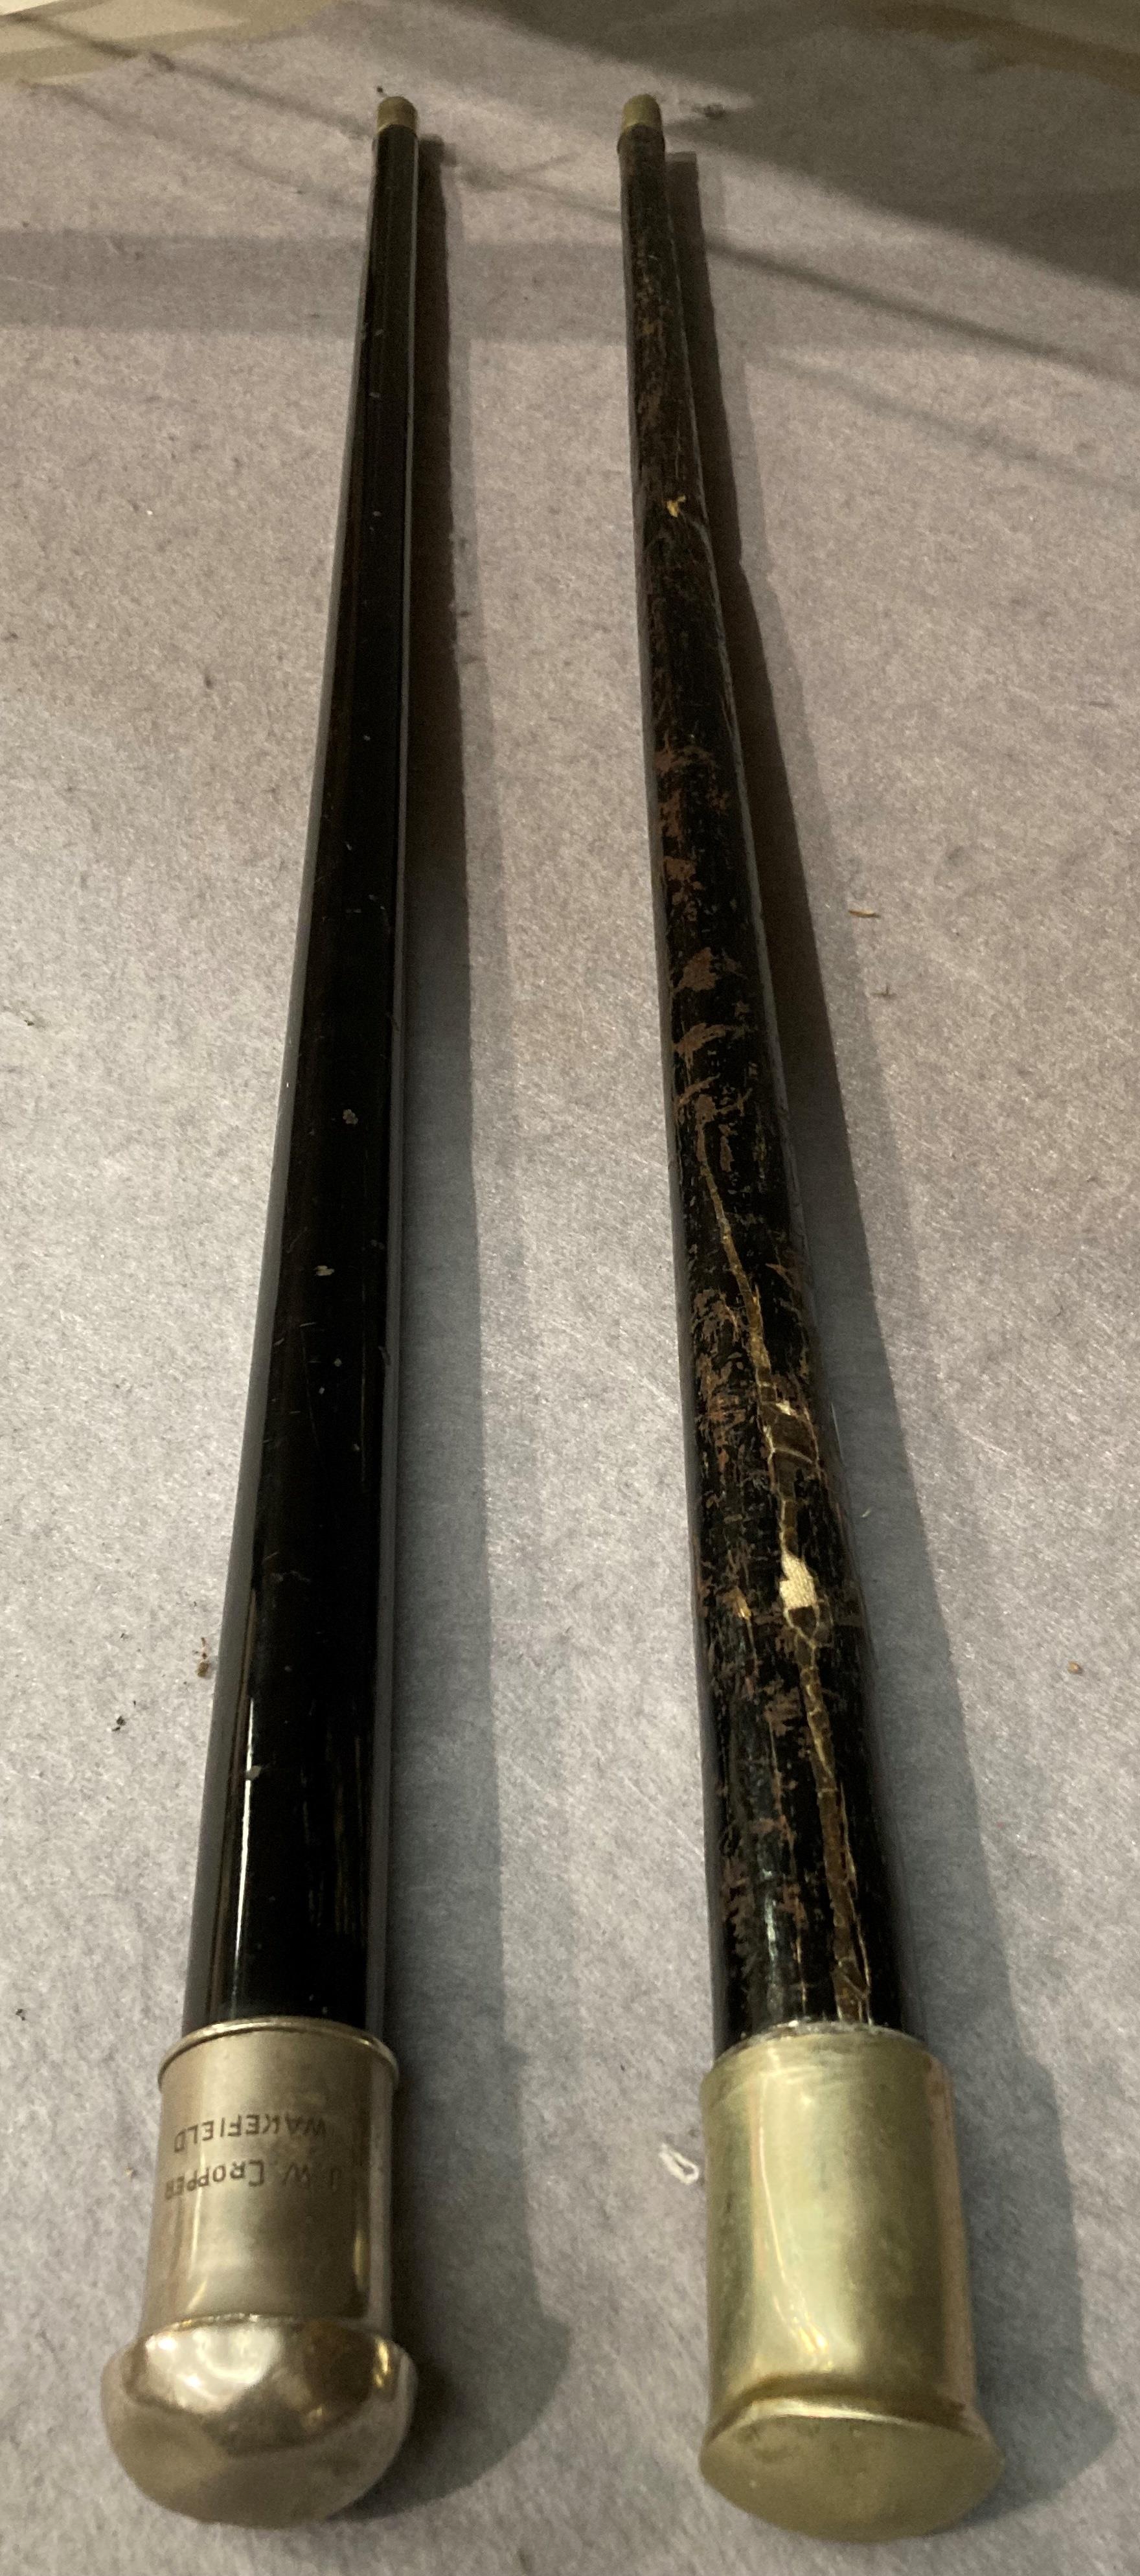 Two ebonised walking sticks (hollow interior) with silver coloured handles one inscribed 'J.